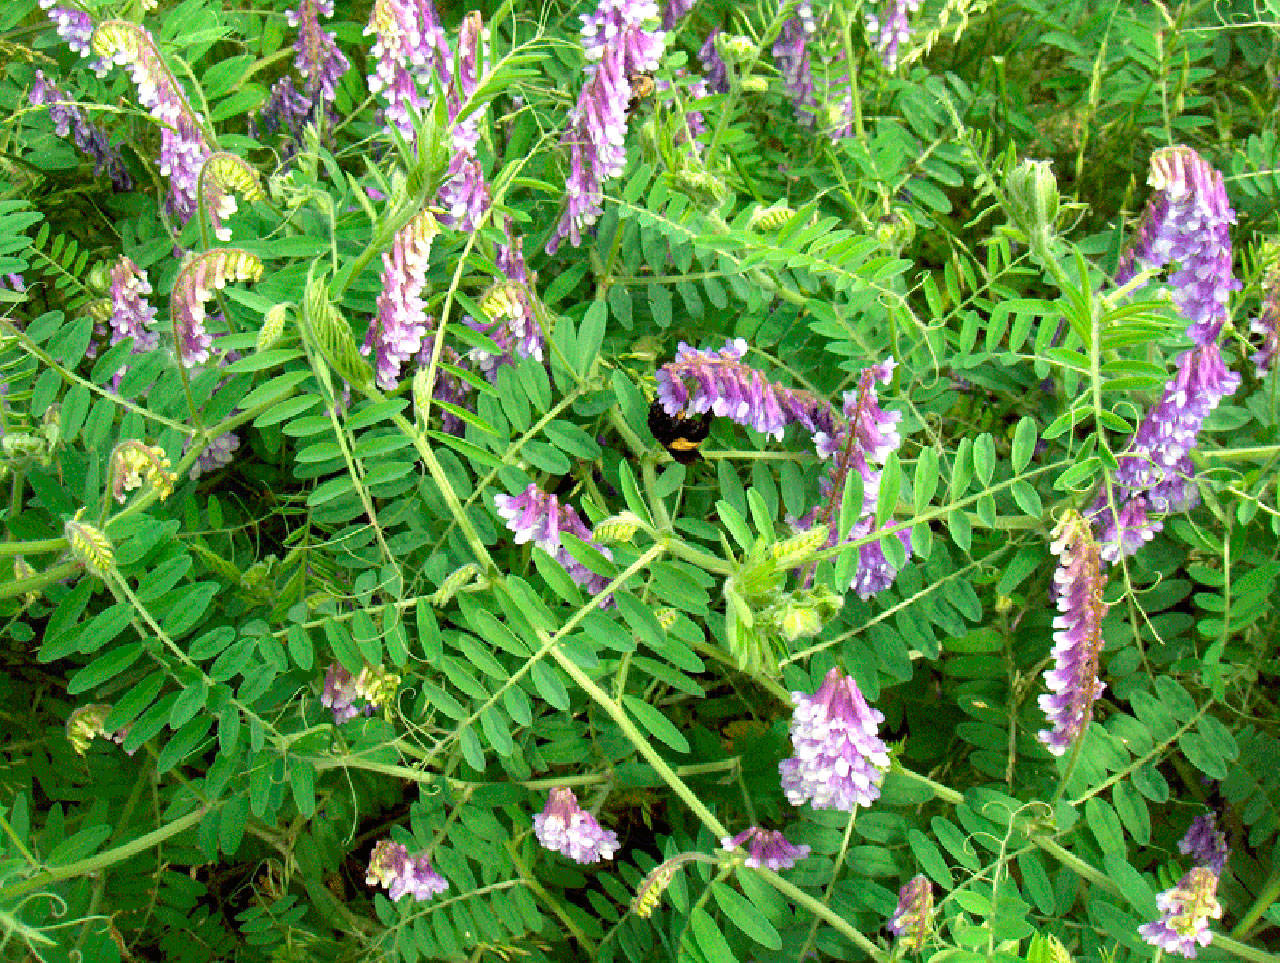 Hairy vetch seedpods contain cyanide, and can be lethal. Stock photo